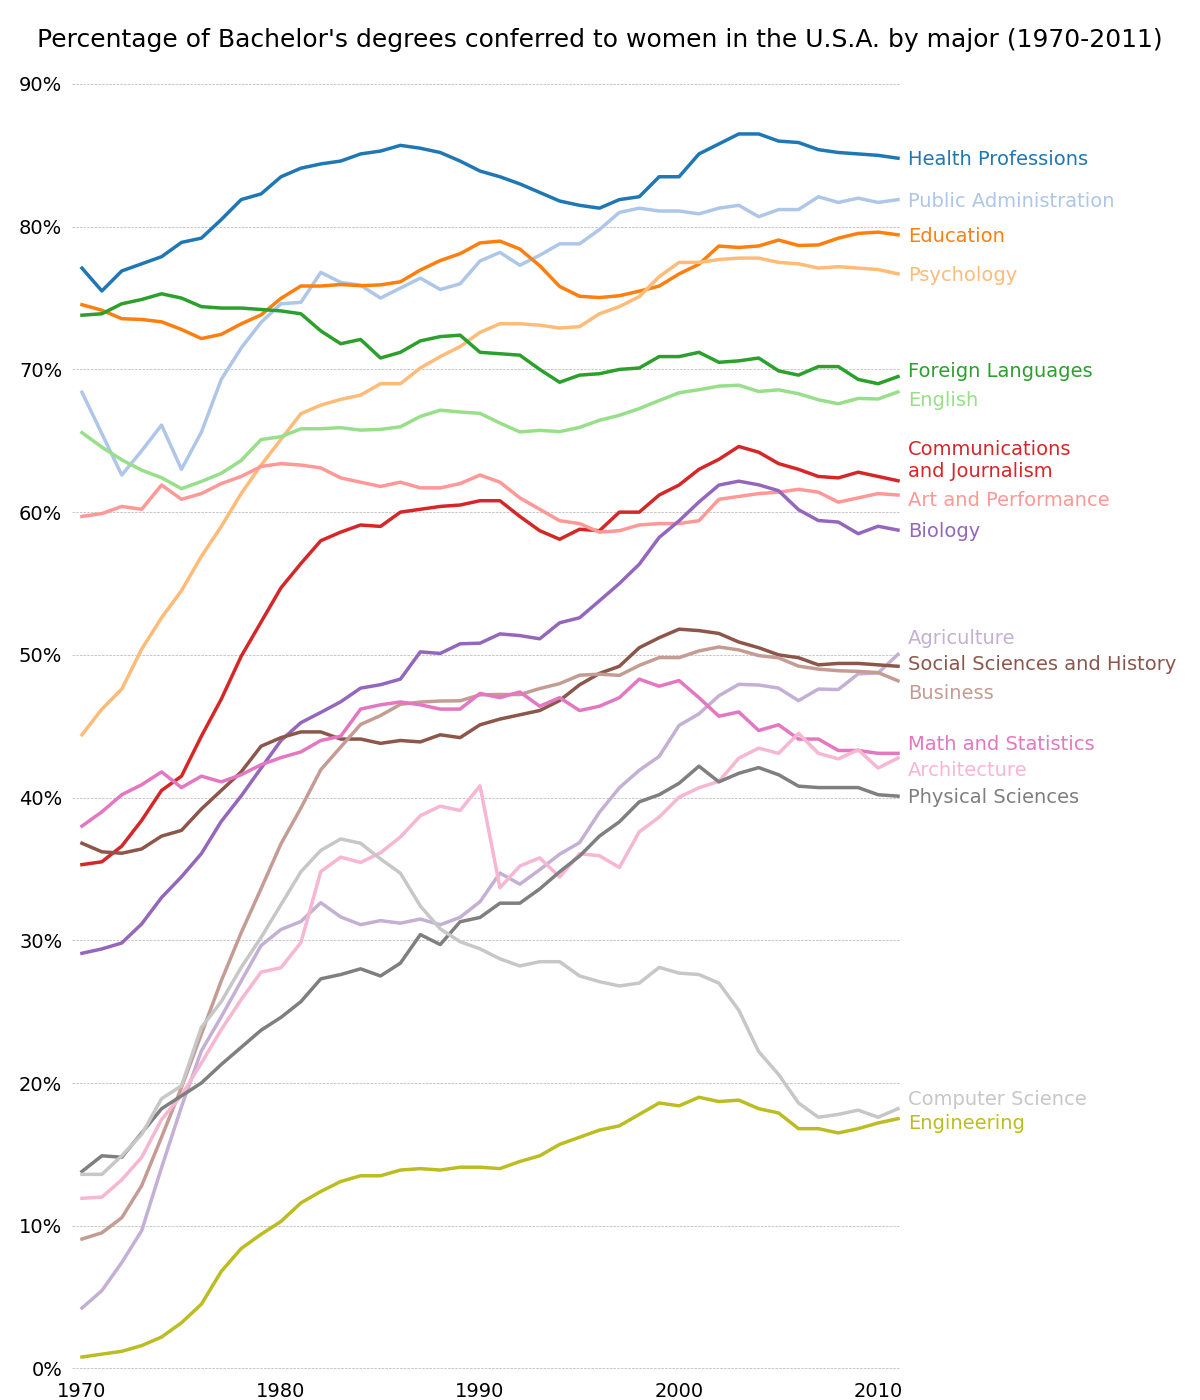 Percentage of Bachelor's degrees conferred to women in the U.S.A. by major (1970-2011)